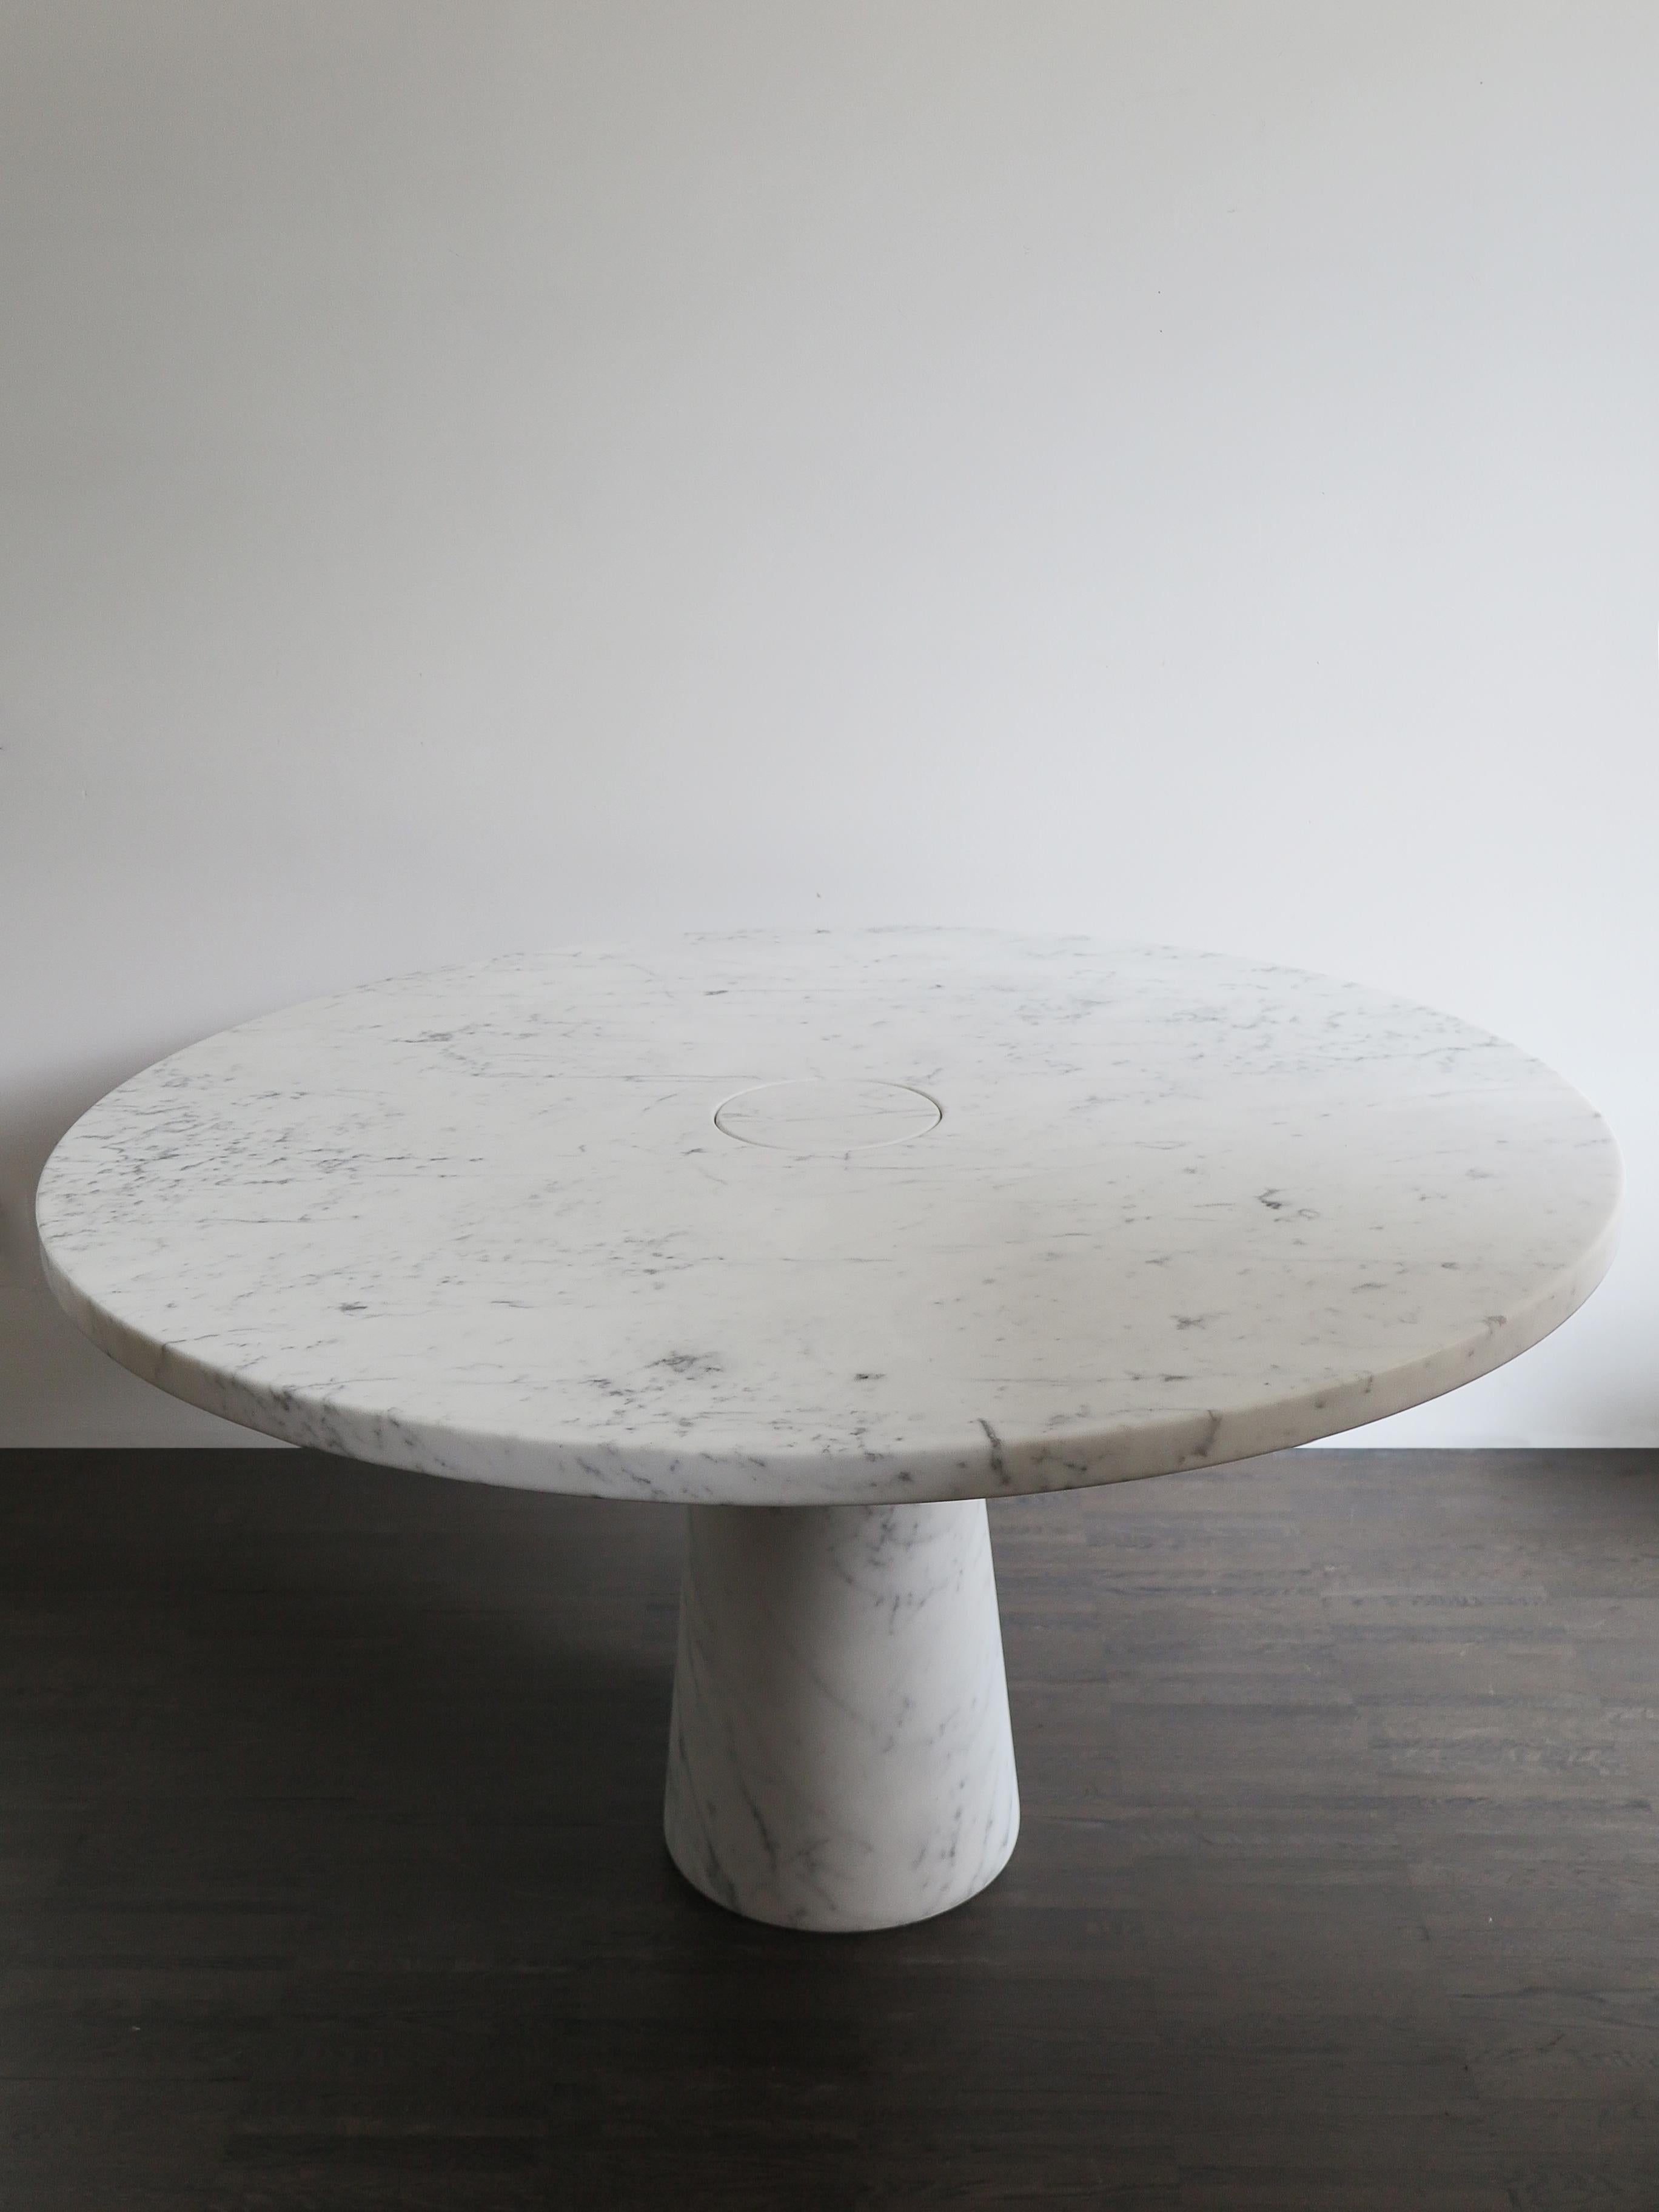 Italian white Carrara marble table Eros serie designed by Angelo Mangiarotti from 1971, the Eros table involves gravity-based embedding bwtween the top and leg made possible by the truncated-conical section of the leg itself, which easily